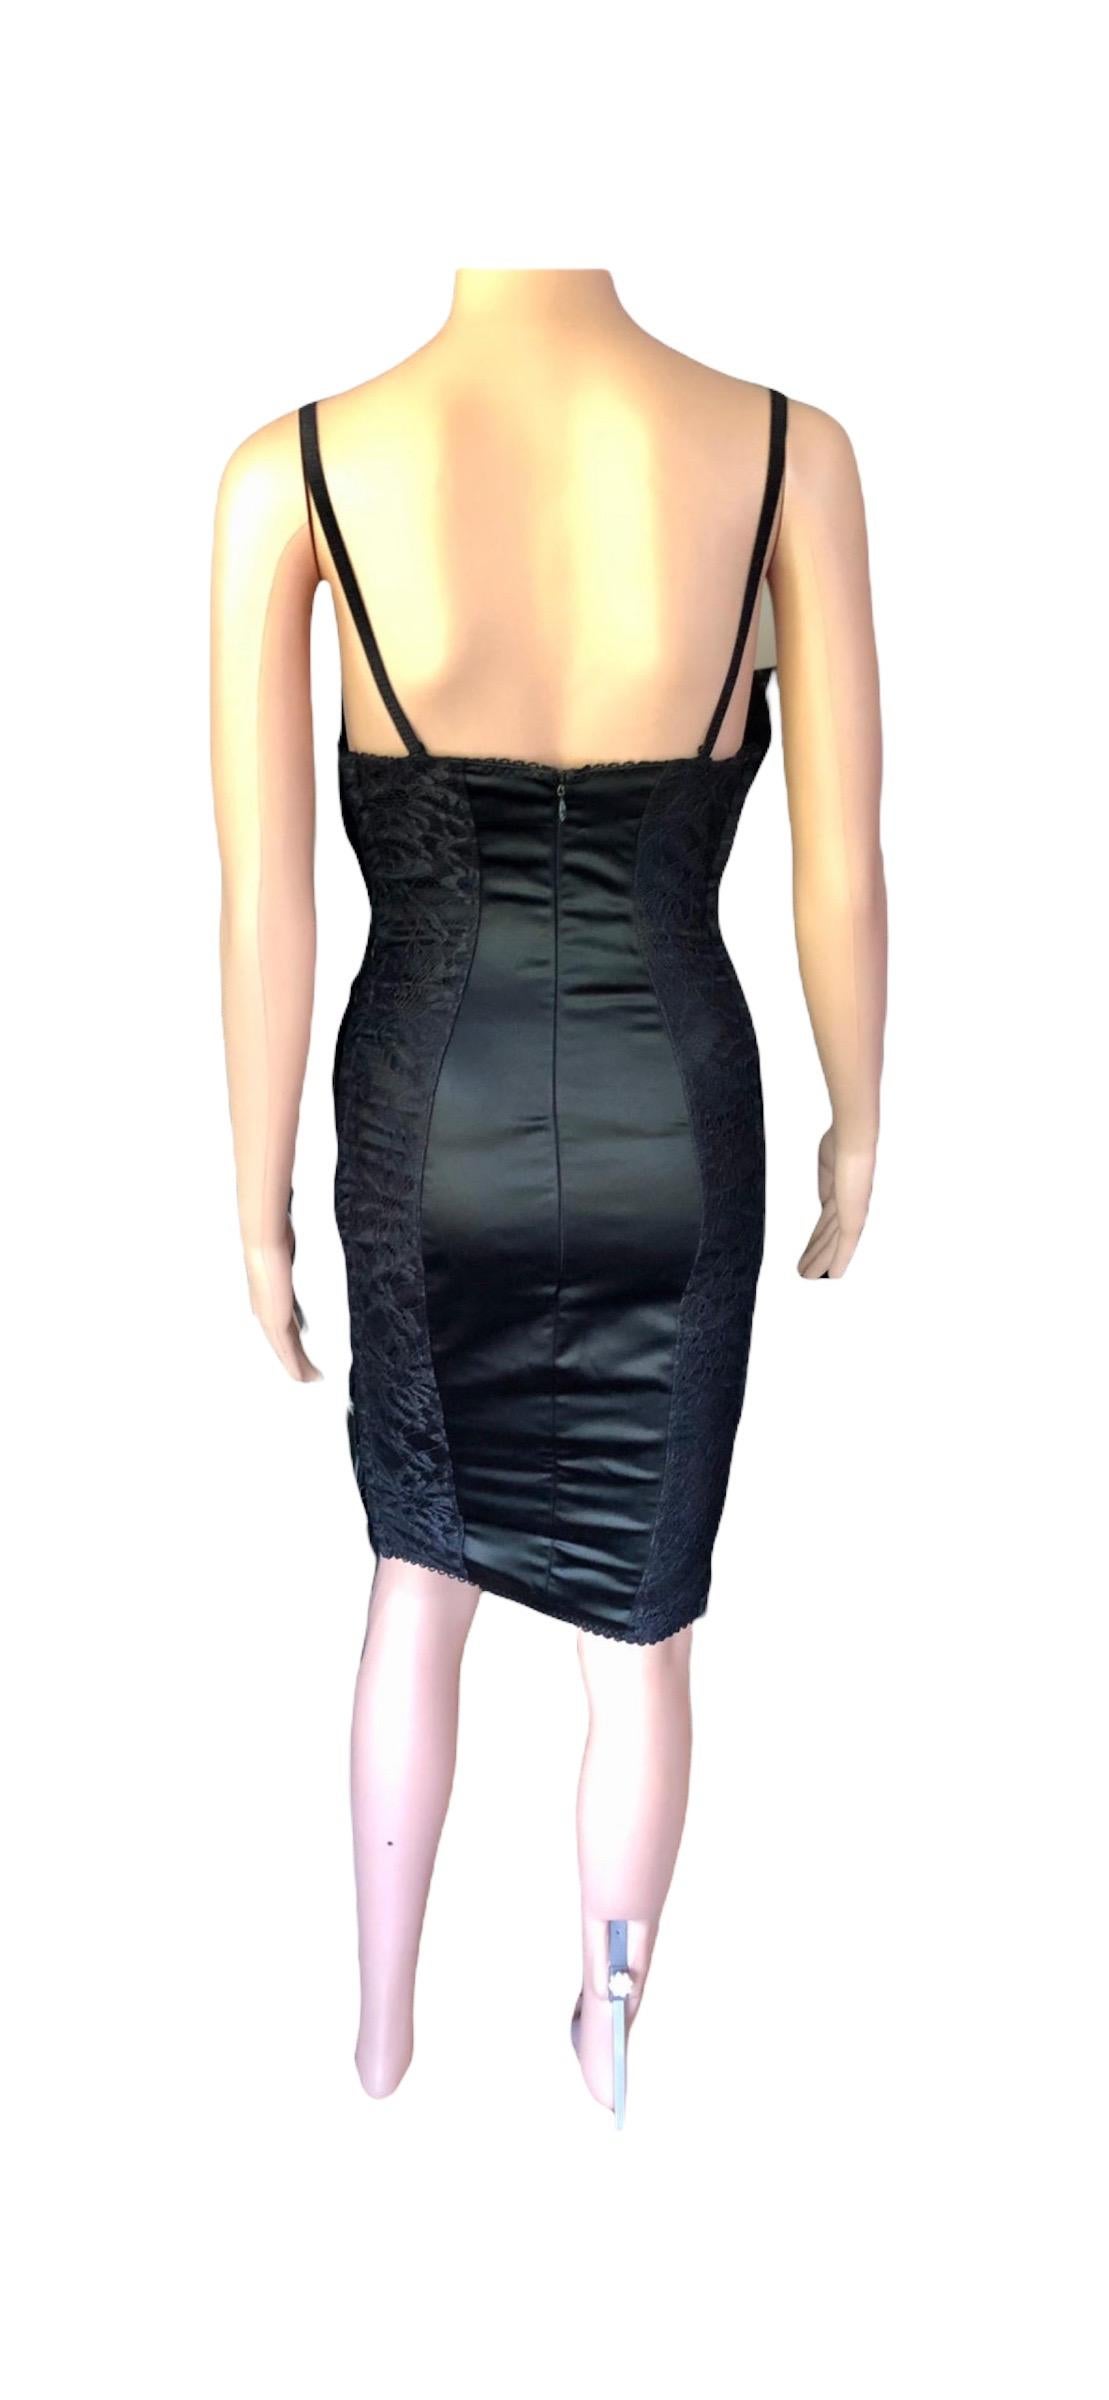 D&G by Dolce & Gabbana Lace Up Bodycon Black Dress For Sale 8